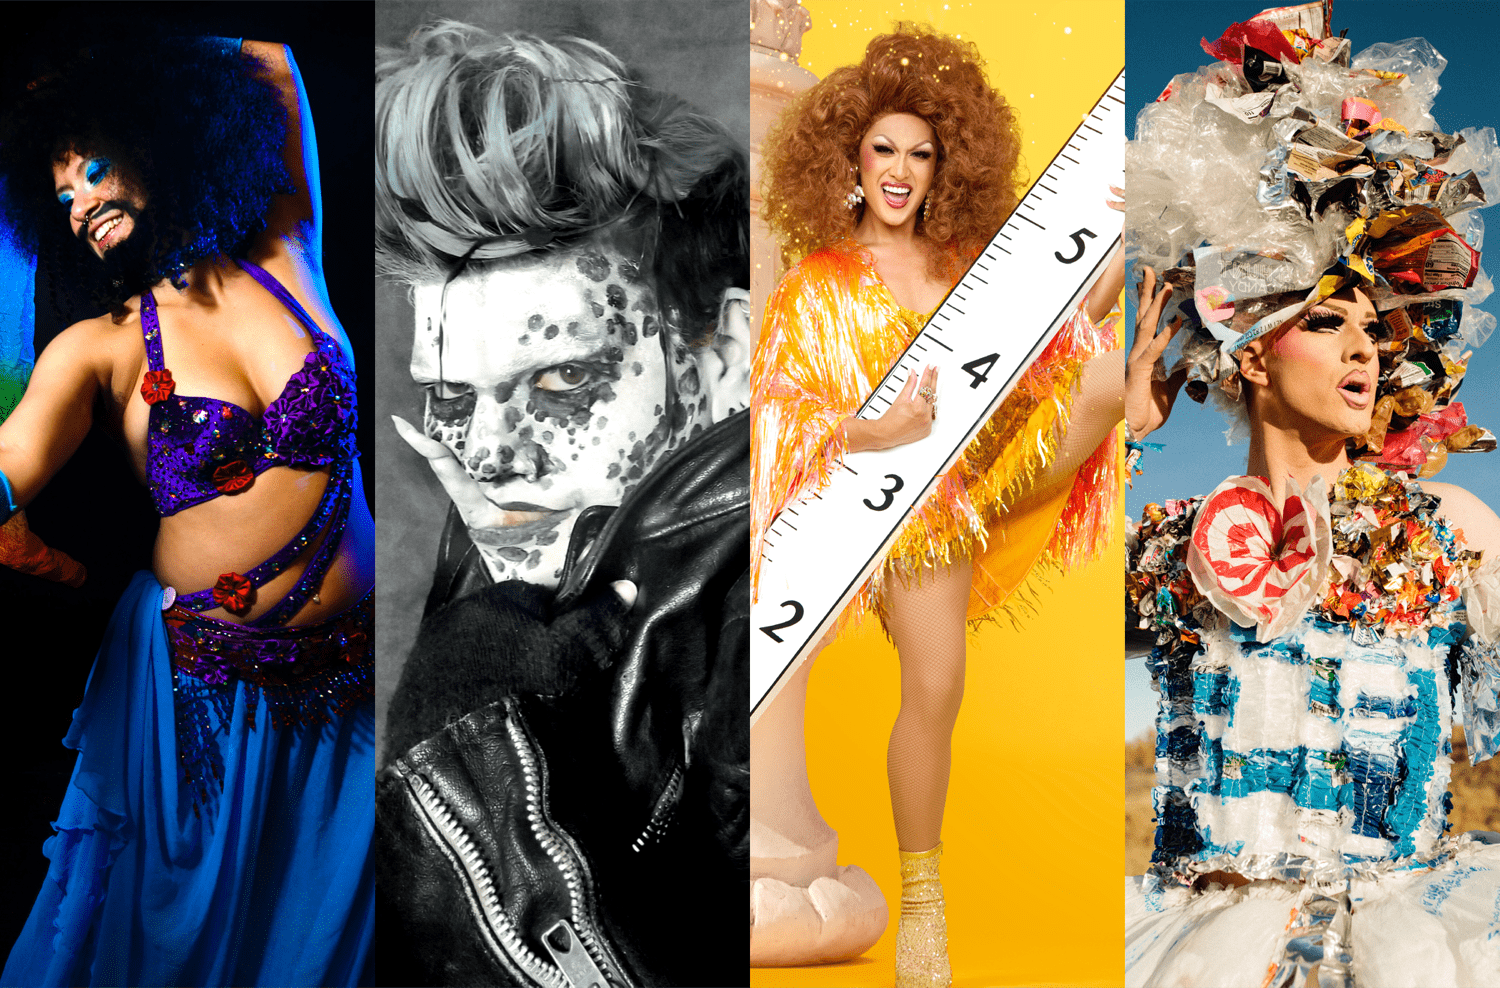 four images of drag performers. from left to right, an